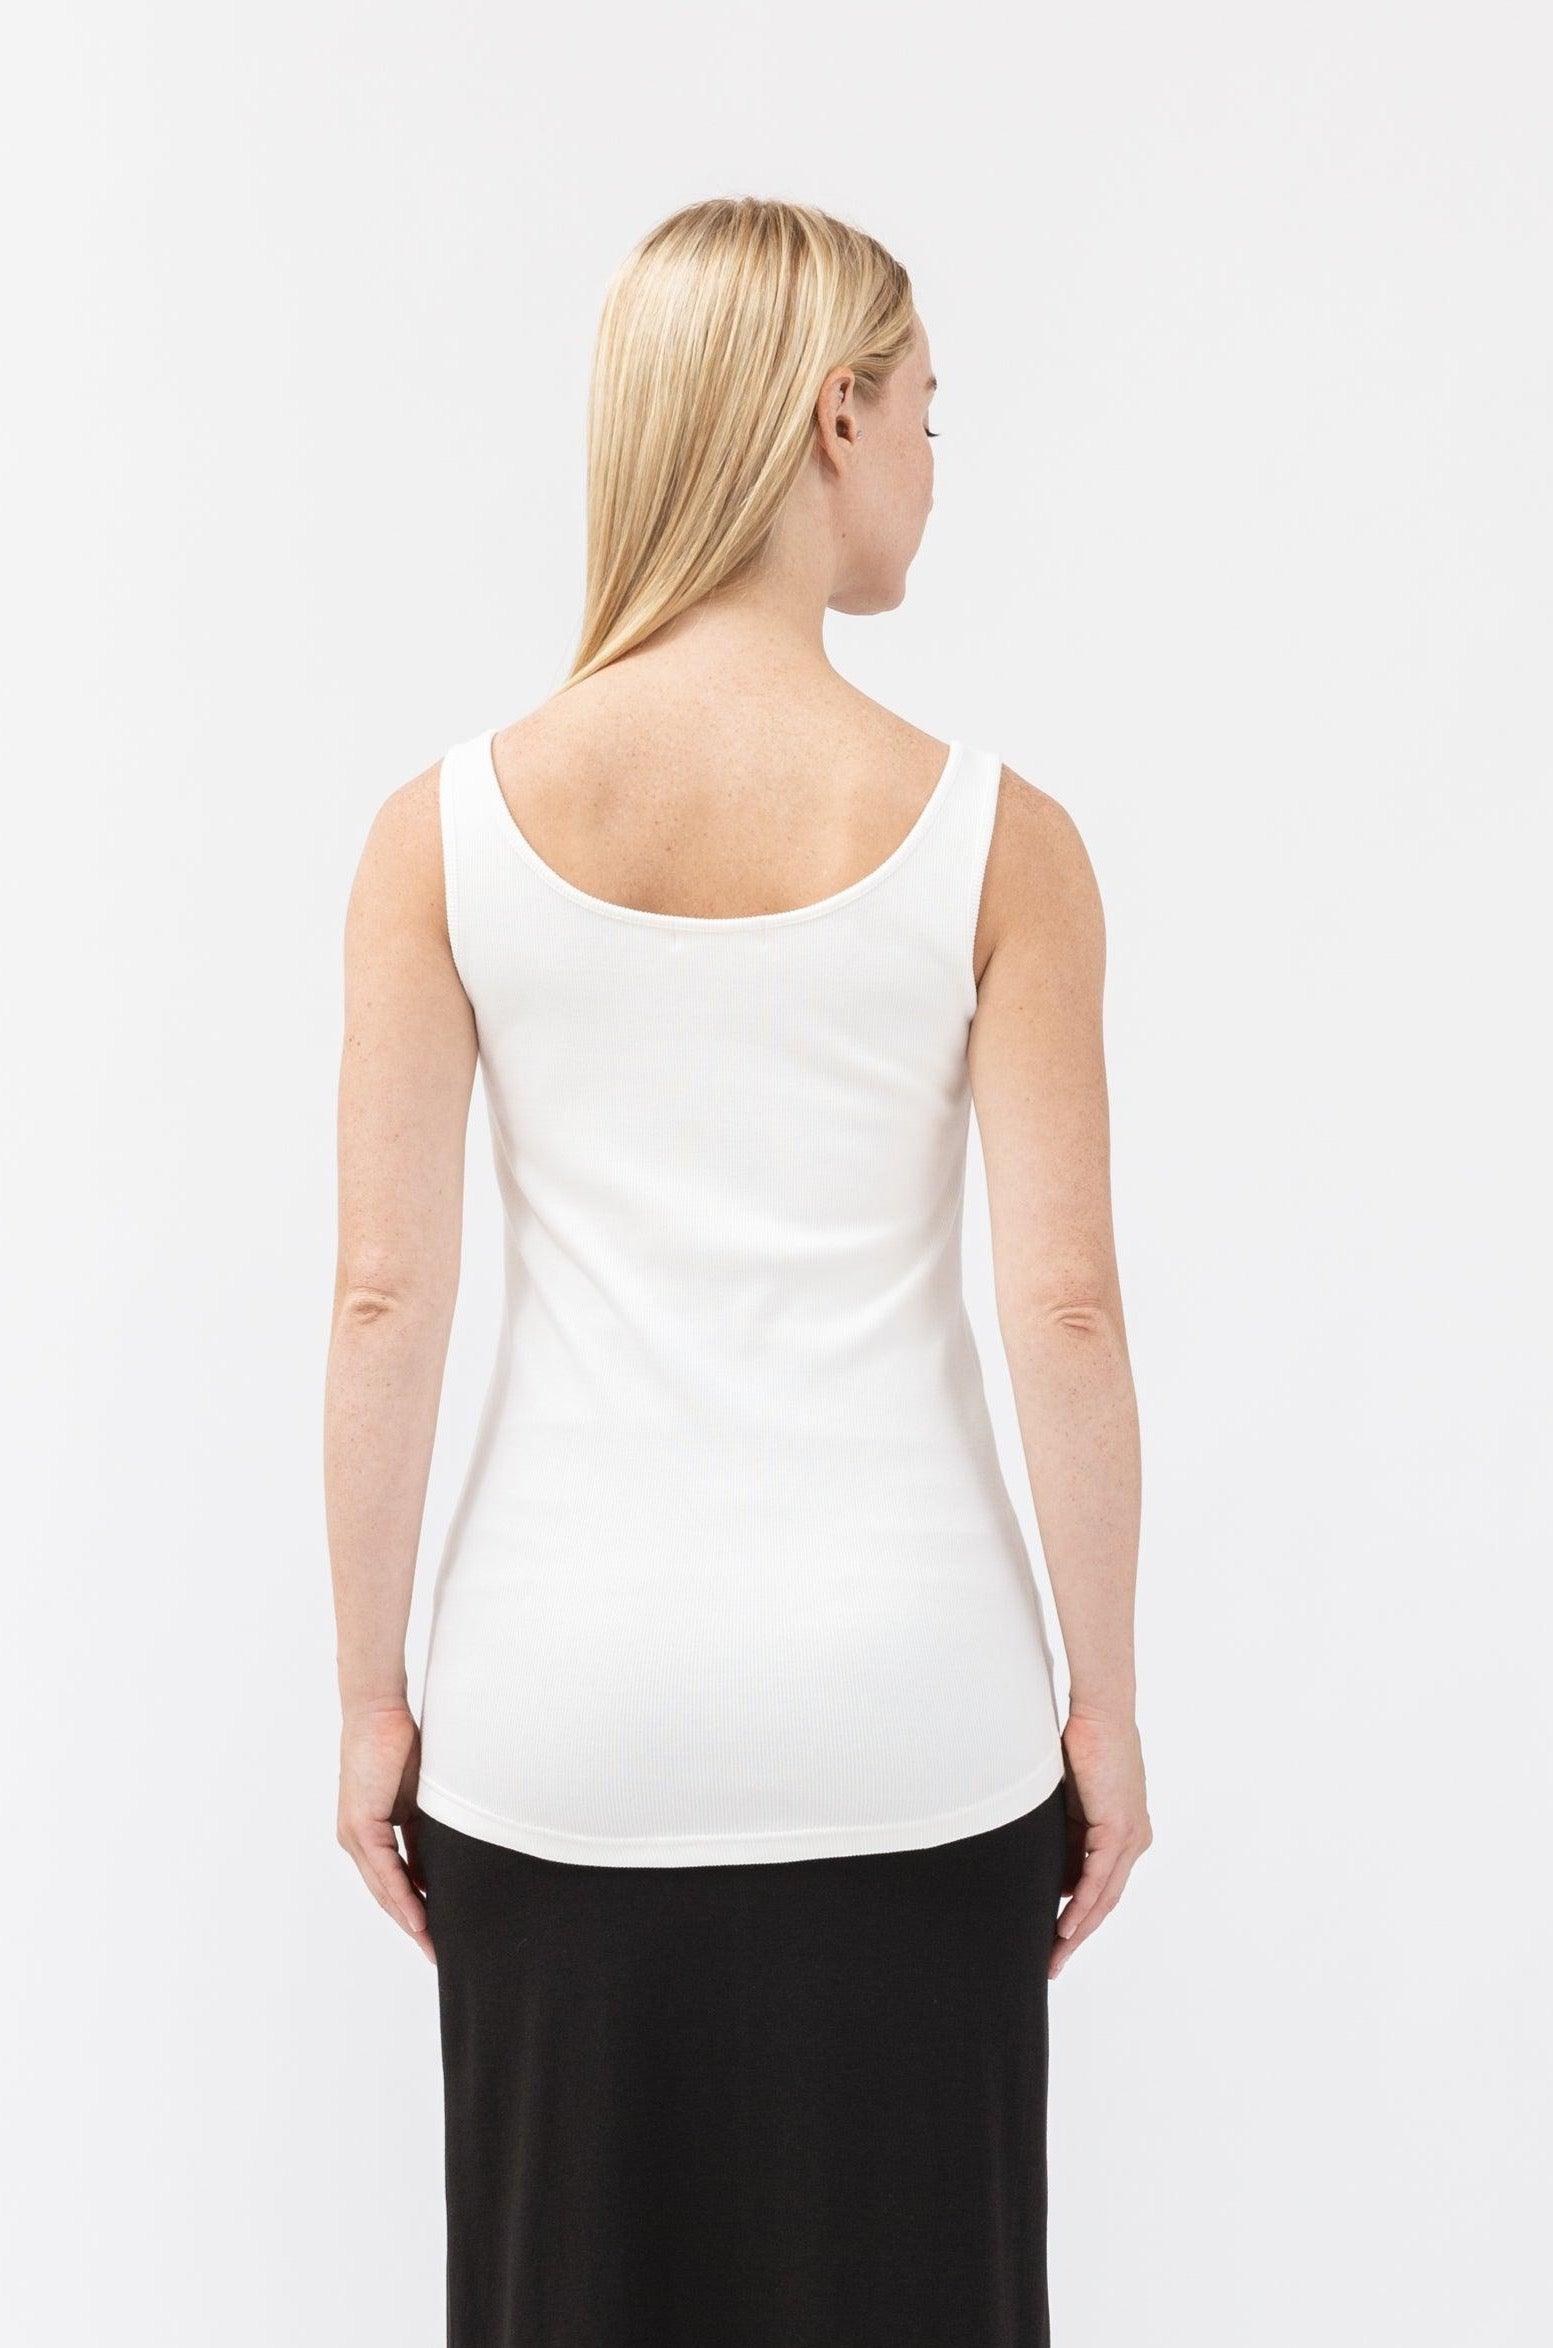 Women's Ribbed Tank Top - NOT LABELED